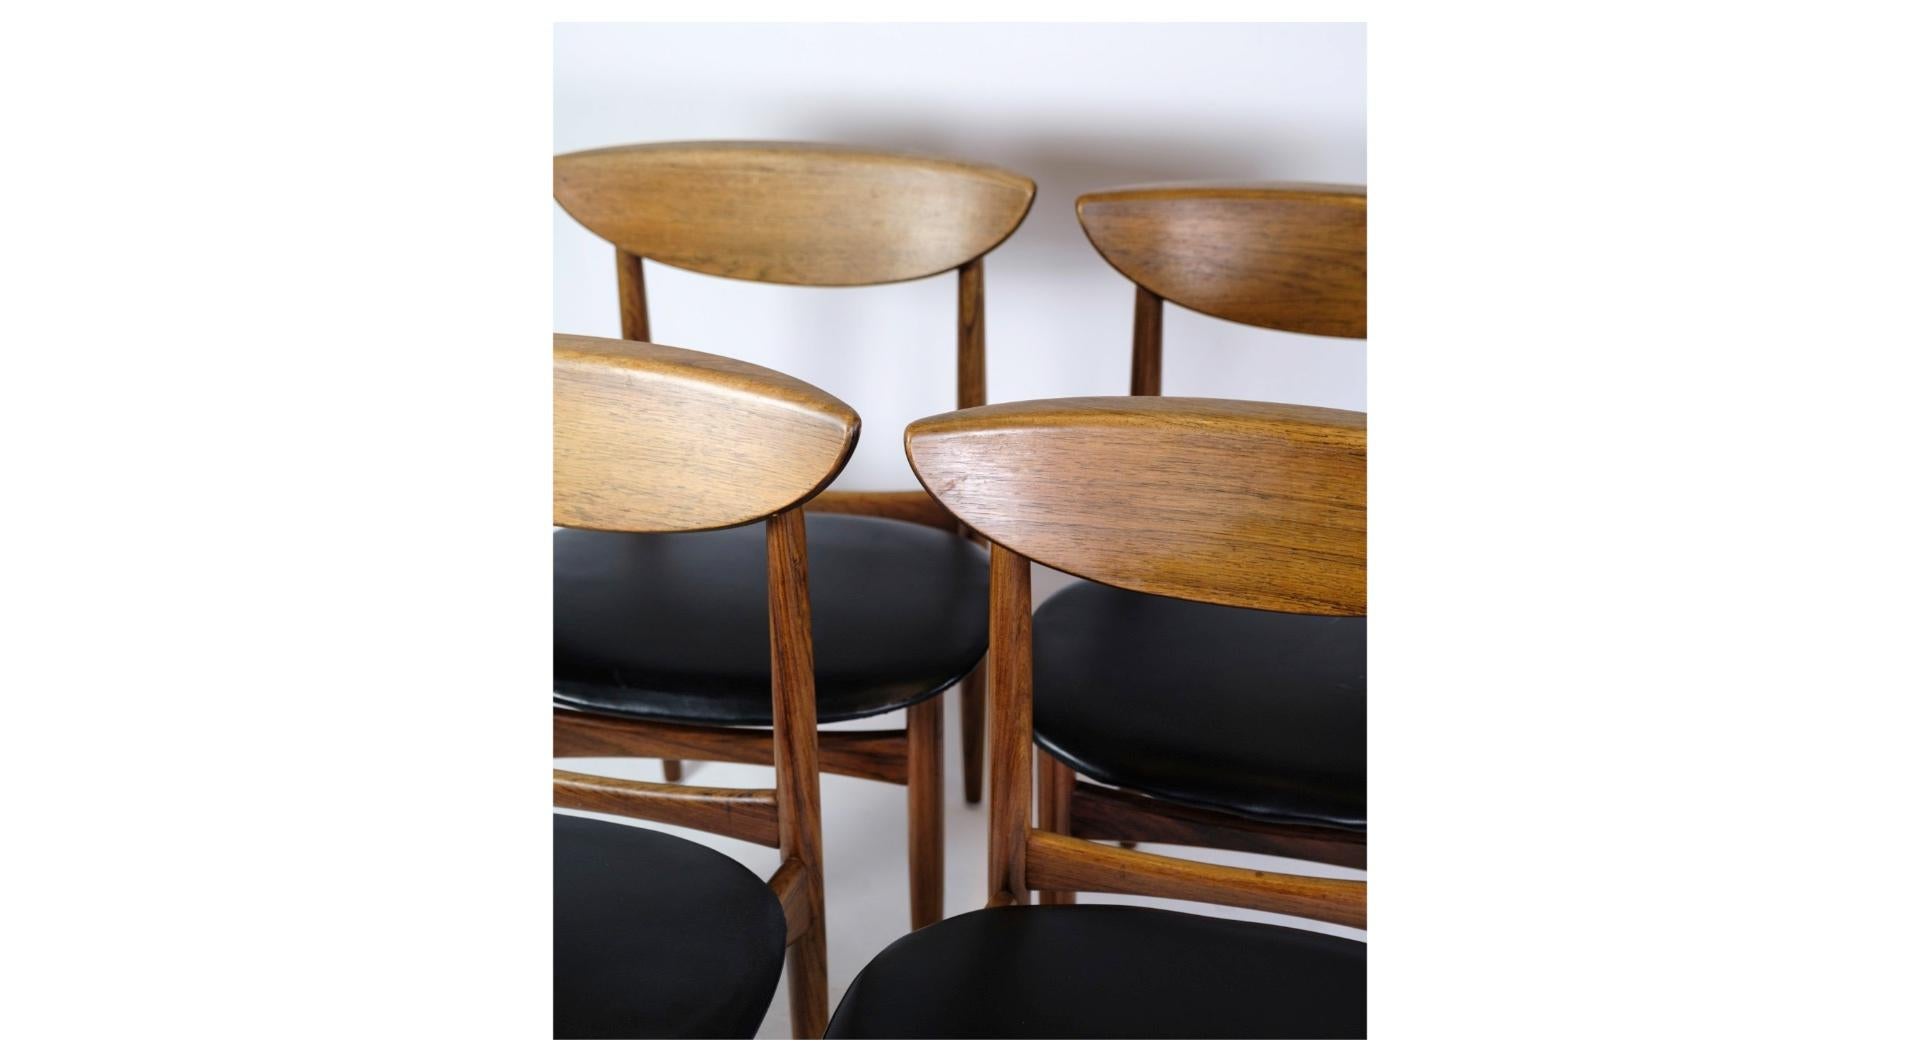 This set of four dining chairs, crafted from exquisite rosewood and designed by Kurt Østervig for K.P. Møbler in the 1960s, epitomizes the timeless elegance of Danish mid-century design.

With their sleek lines and minimalist aesthetic, these chairs